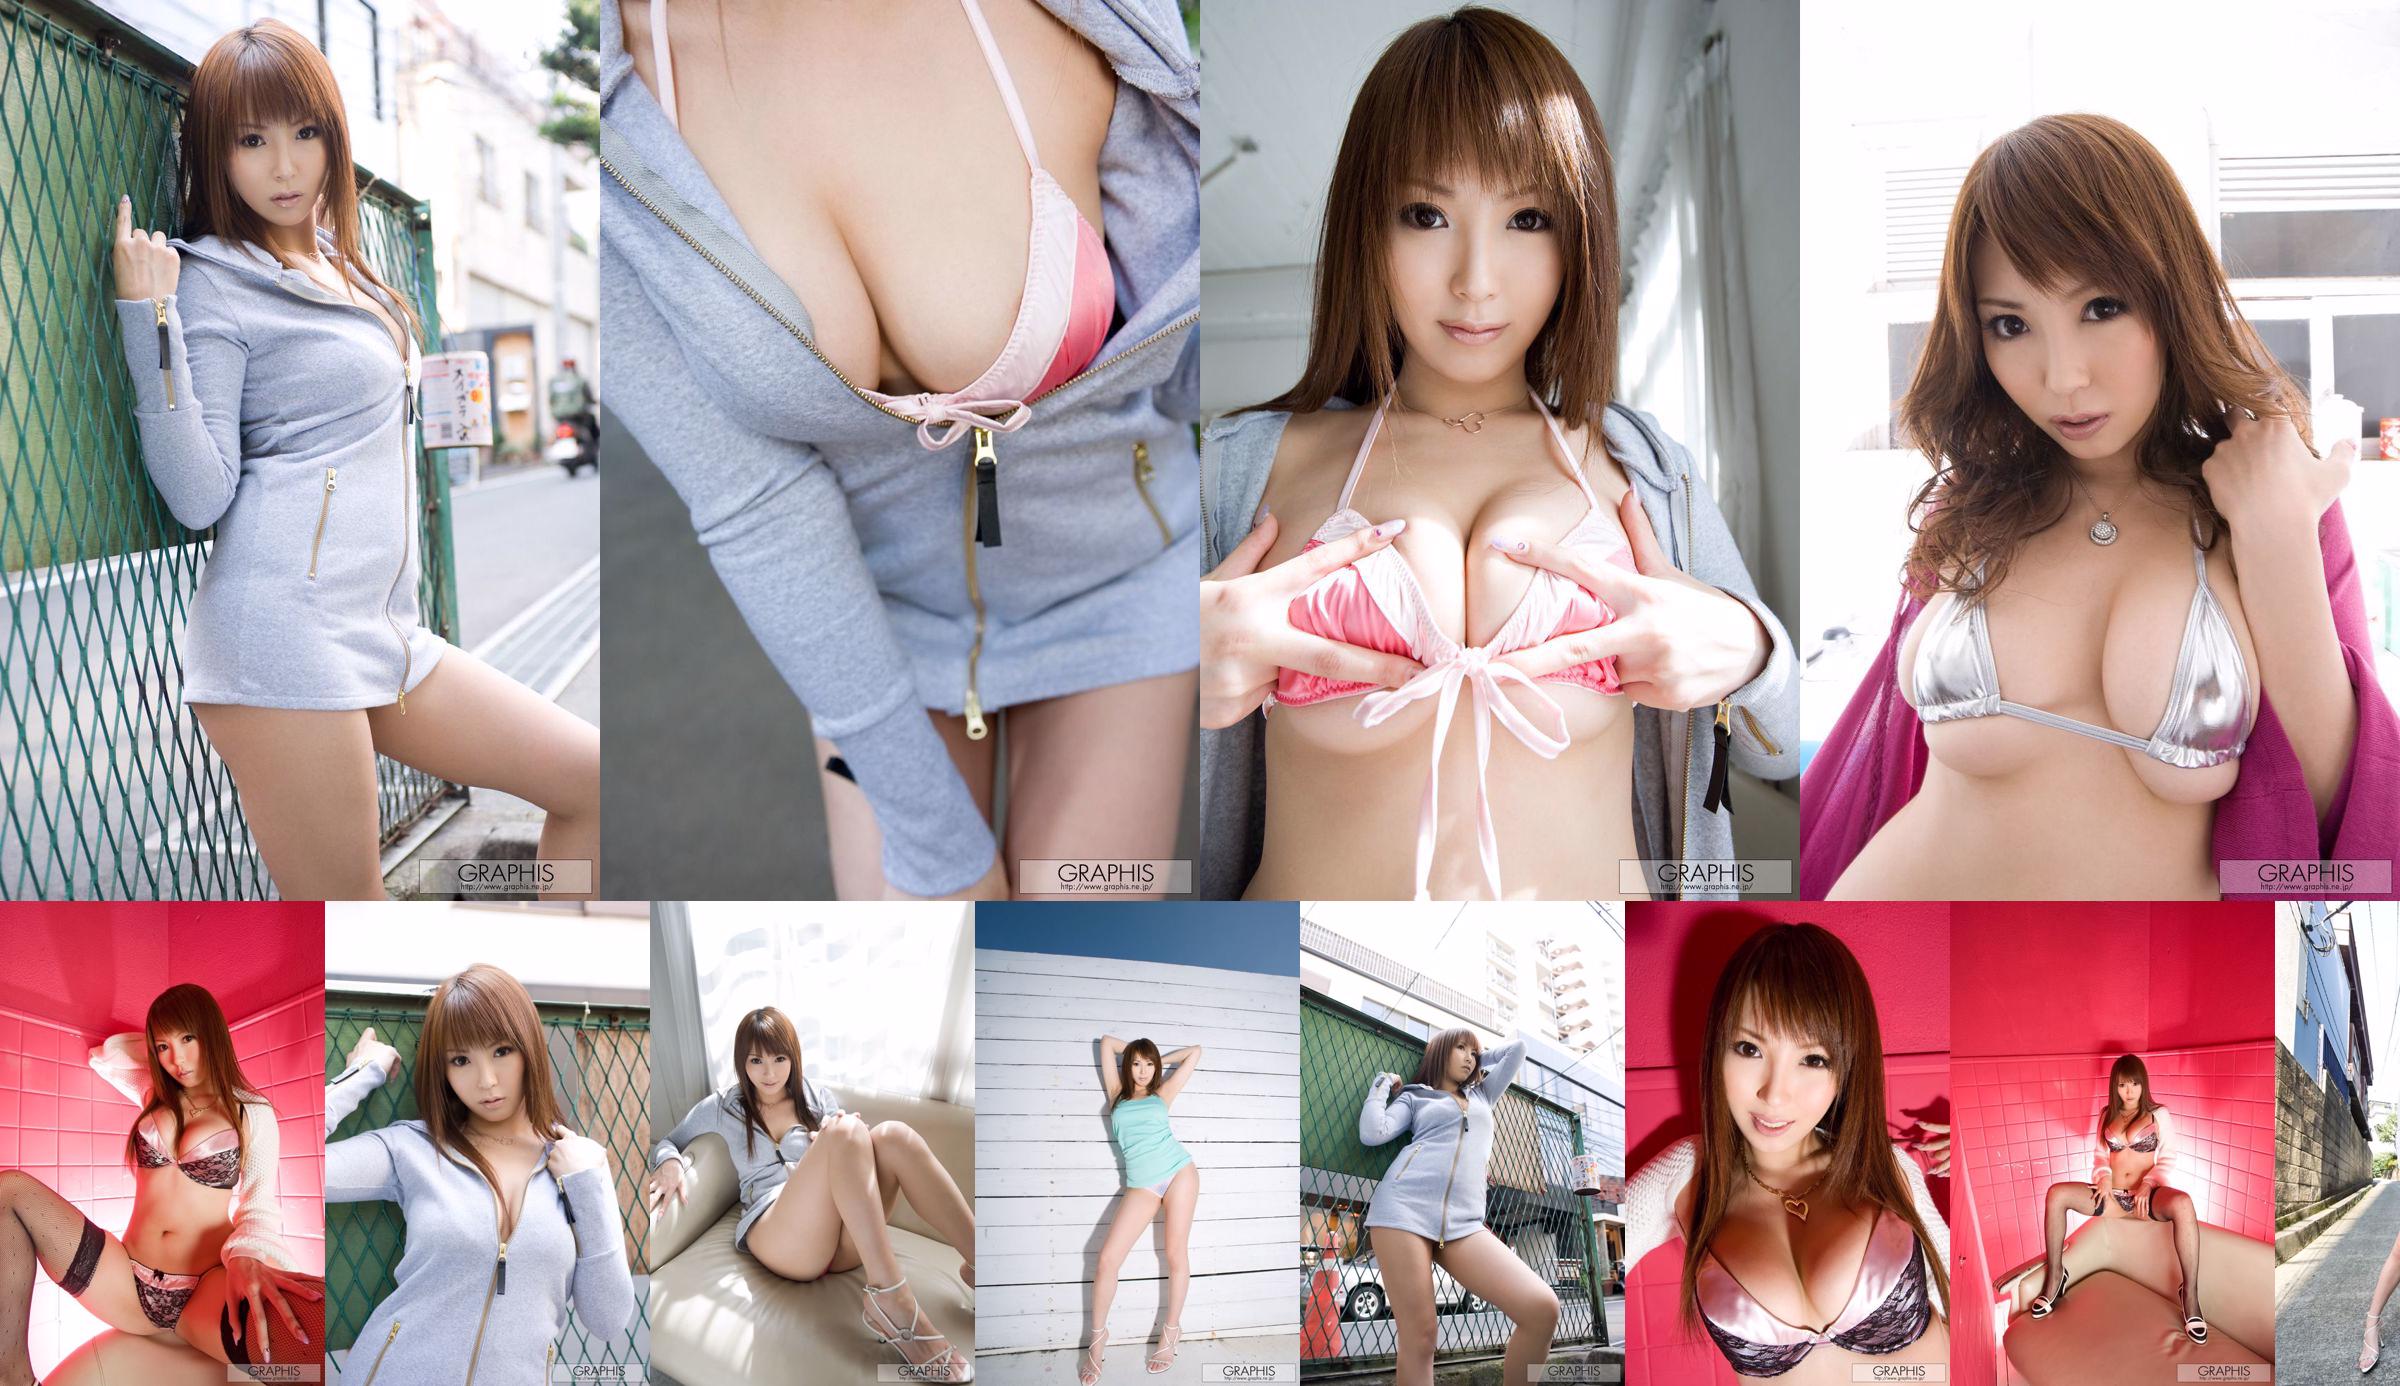 Ruru Anoa / Ano Ano 《s'exclamant »[Graphis] Gals No.b5370c Page 1